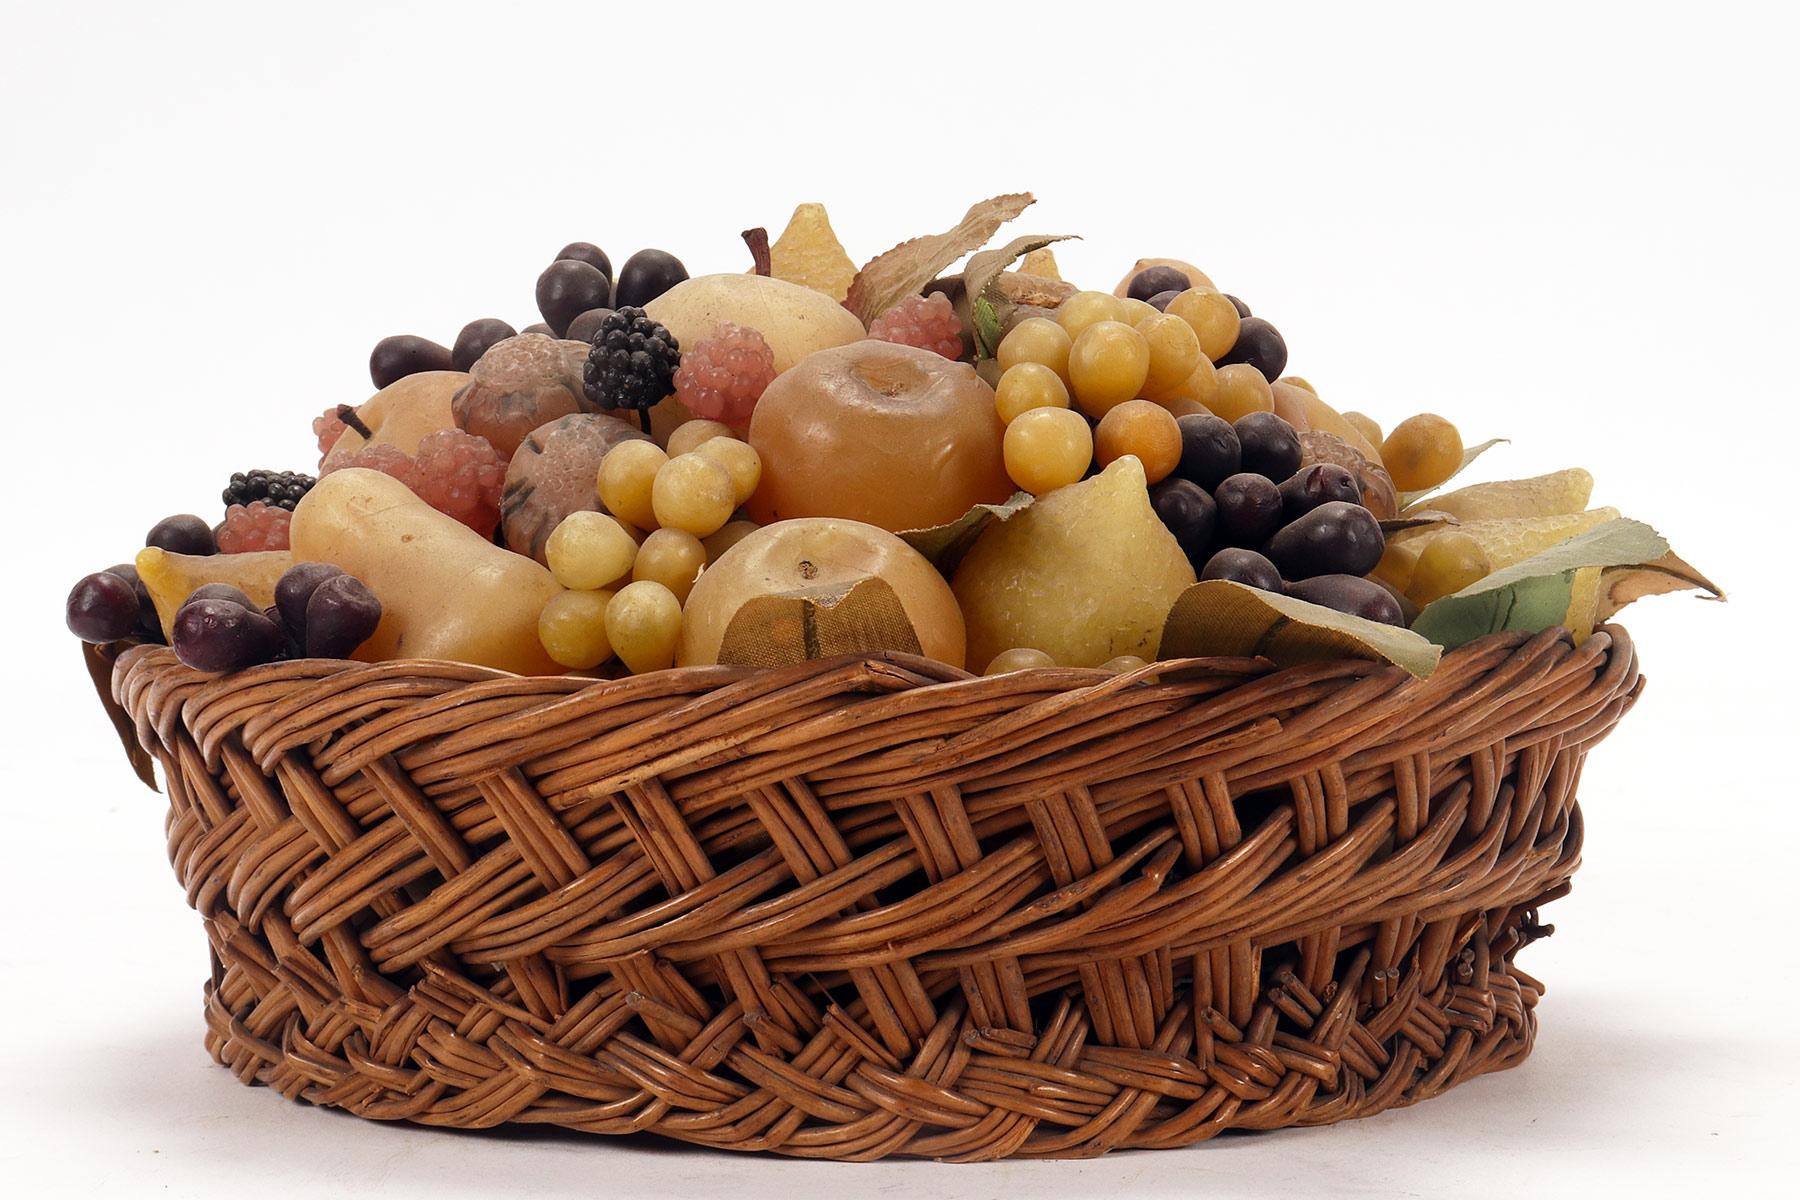 A rare decorative fruit basket made of wax. The elegant wicker basket contains an arrangement of colored wax fruit. The branches and leaves are made of wire, paper and colored fabric. Among the fruit, we recognize blackberries, pears, gooseberries,